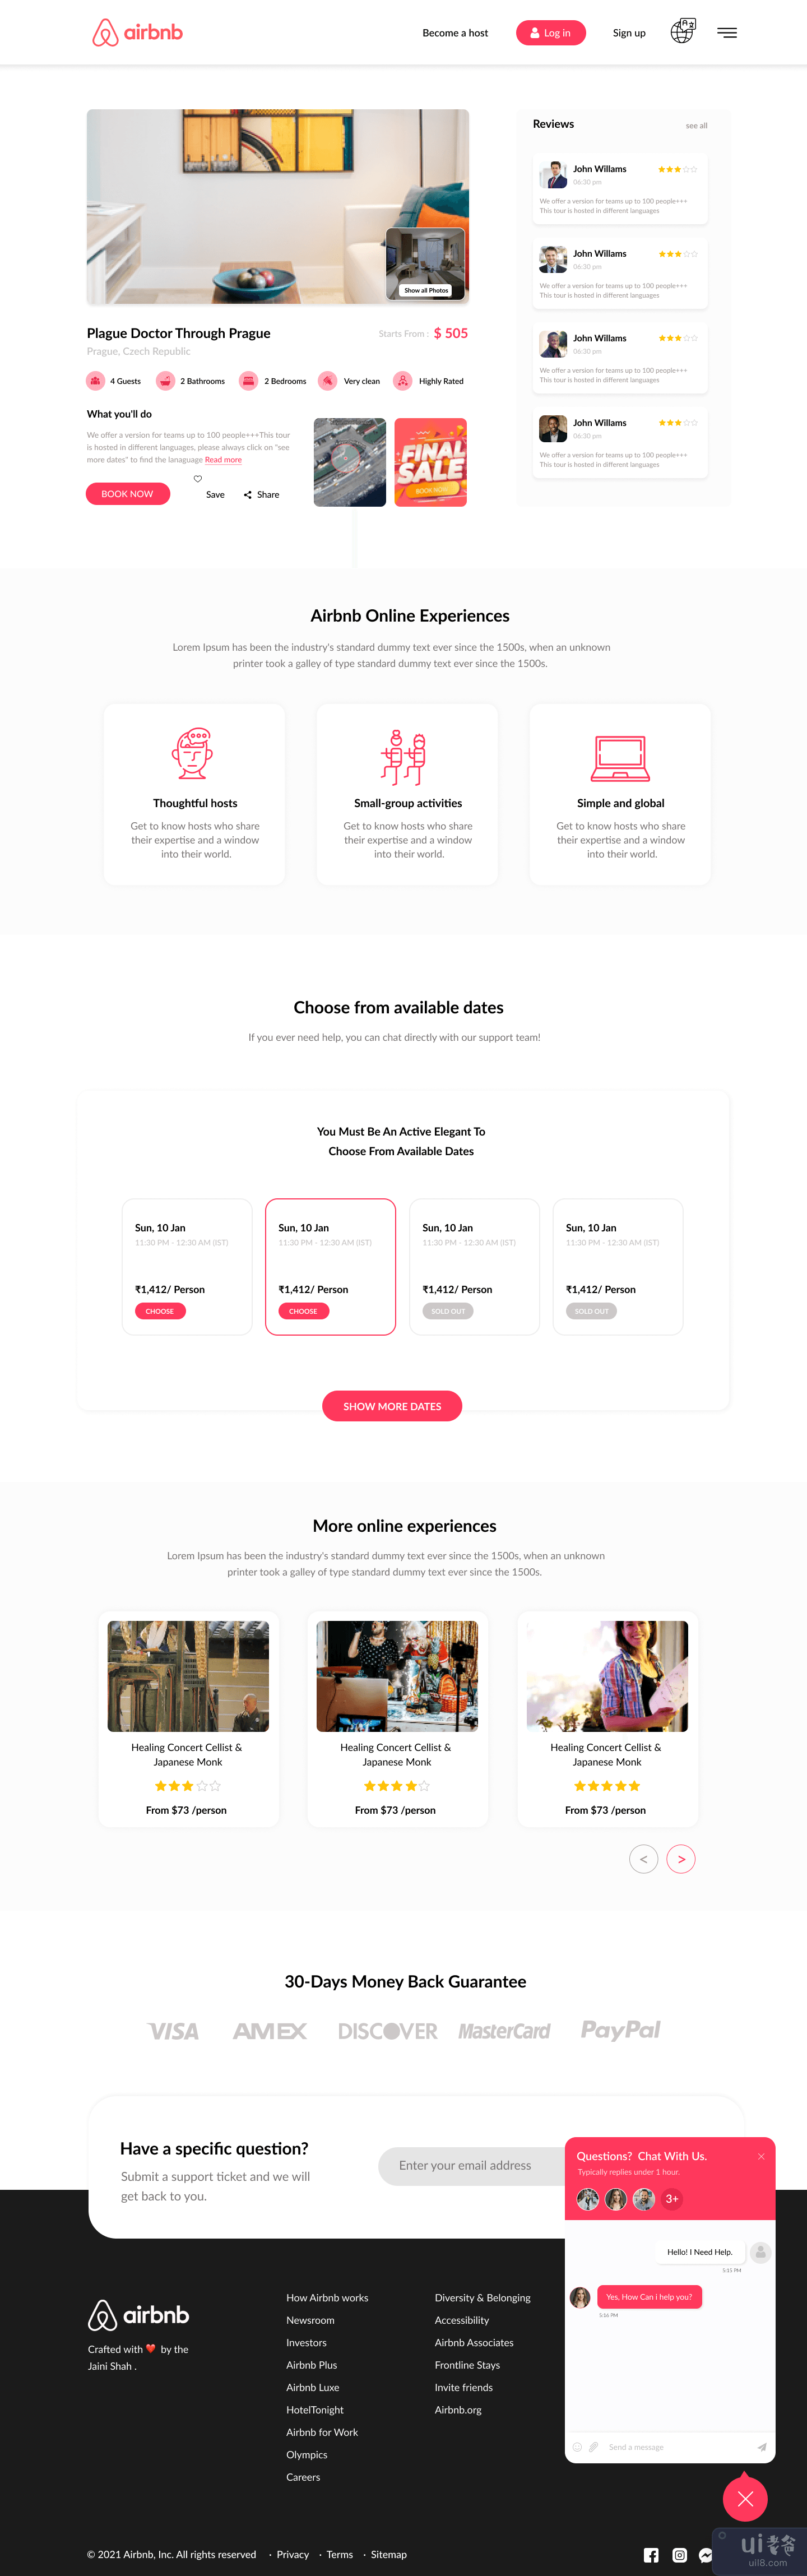 Airbnb页面重新设计(Airbnb Page Redesign)插图